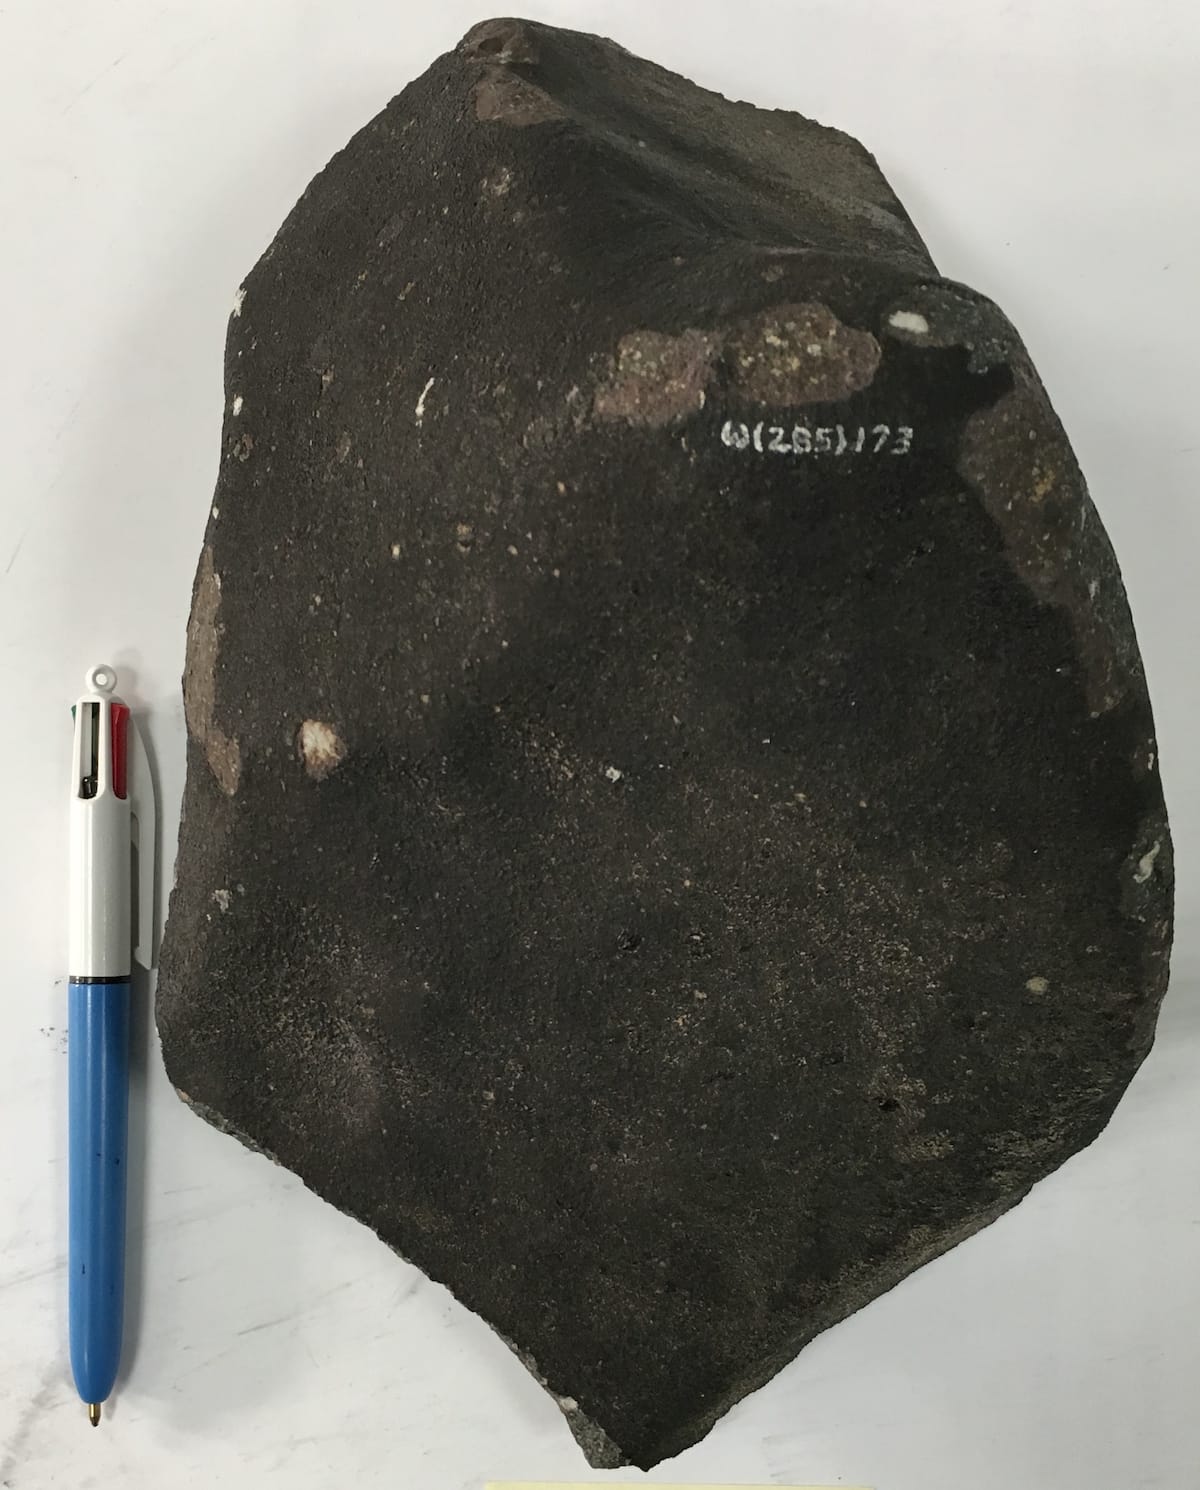 Photo of the exterior crust of a fragment of the Allende meteorite.